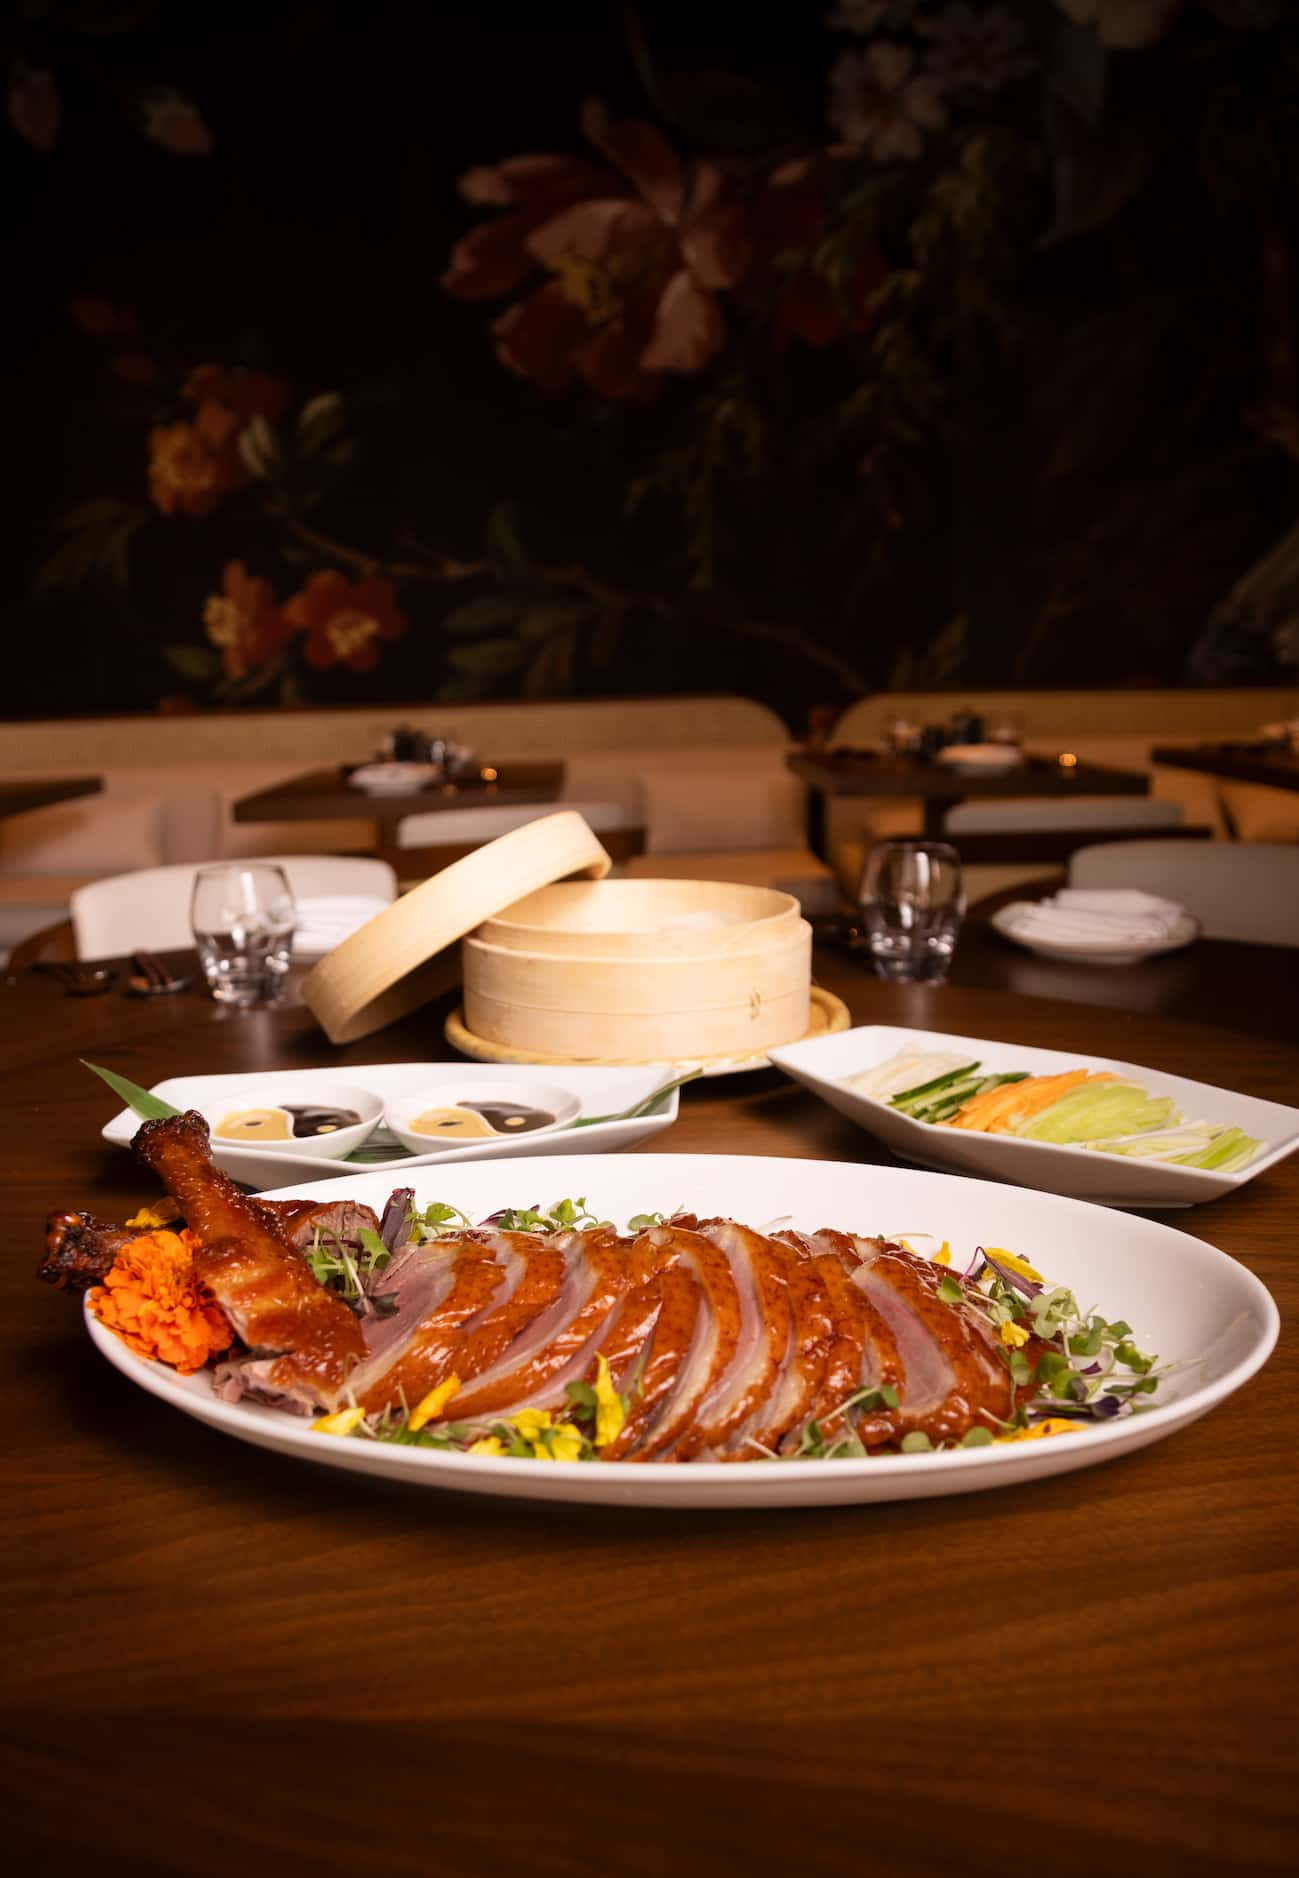 The MC Imperial Peking Duck arrives to the table on a cart. Servers place the duck on the...